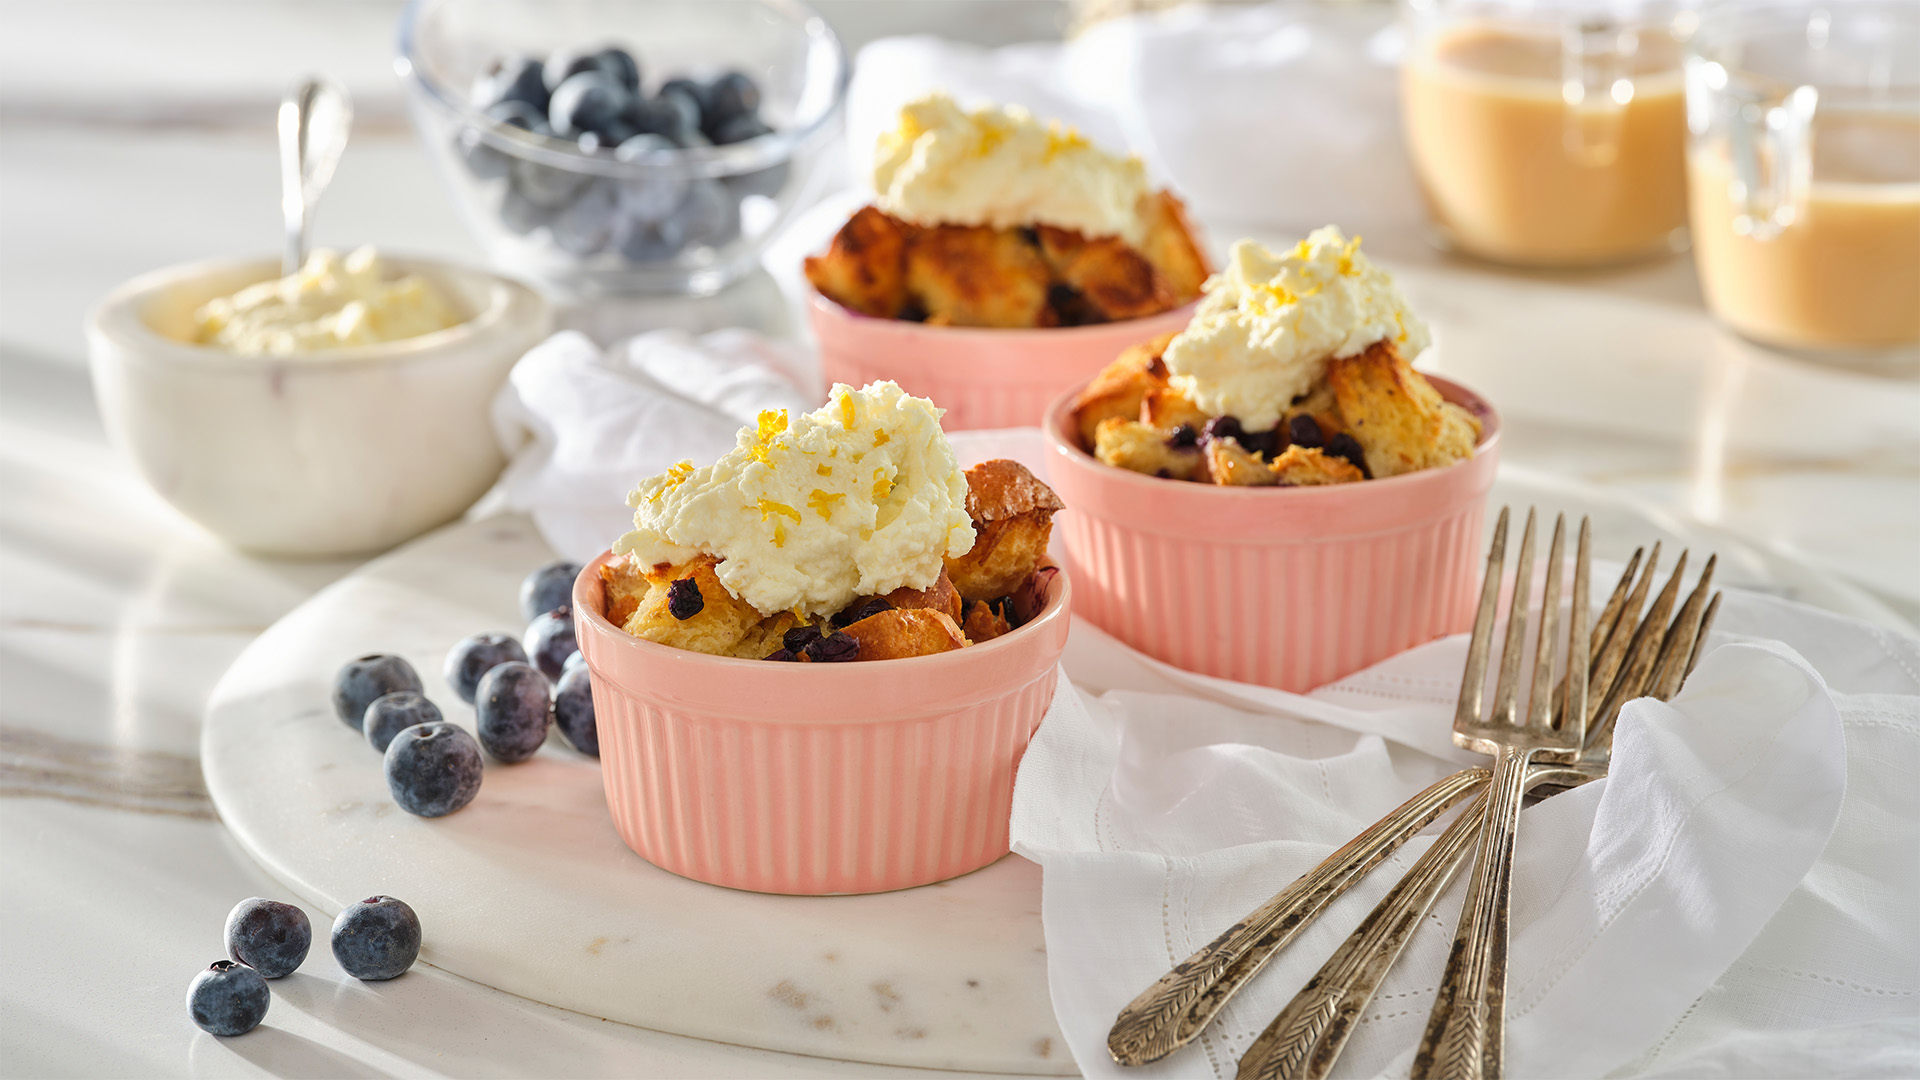 Three small pink bowls of blueberry french toast bake with a dollop of lemon mascarpone on top next to some blueberries, forks, and a small white bowl containing mascarpone with a spoon in it.